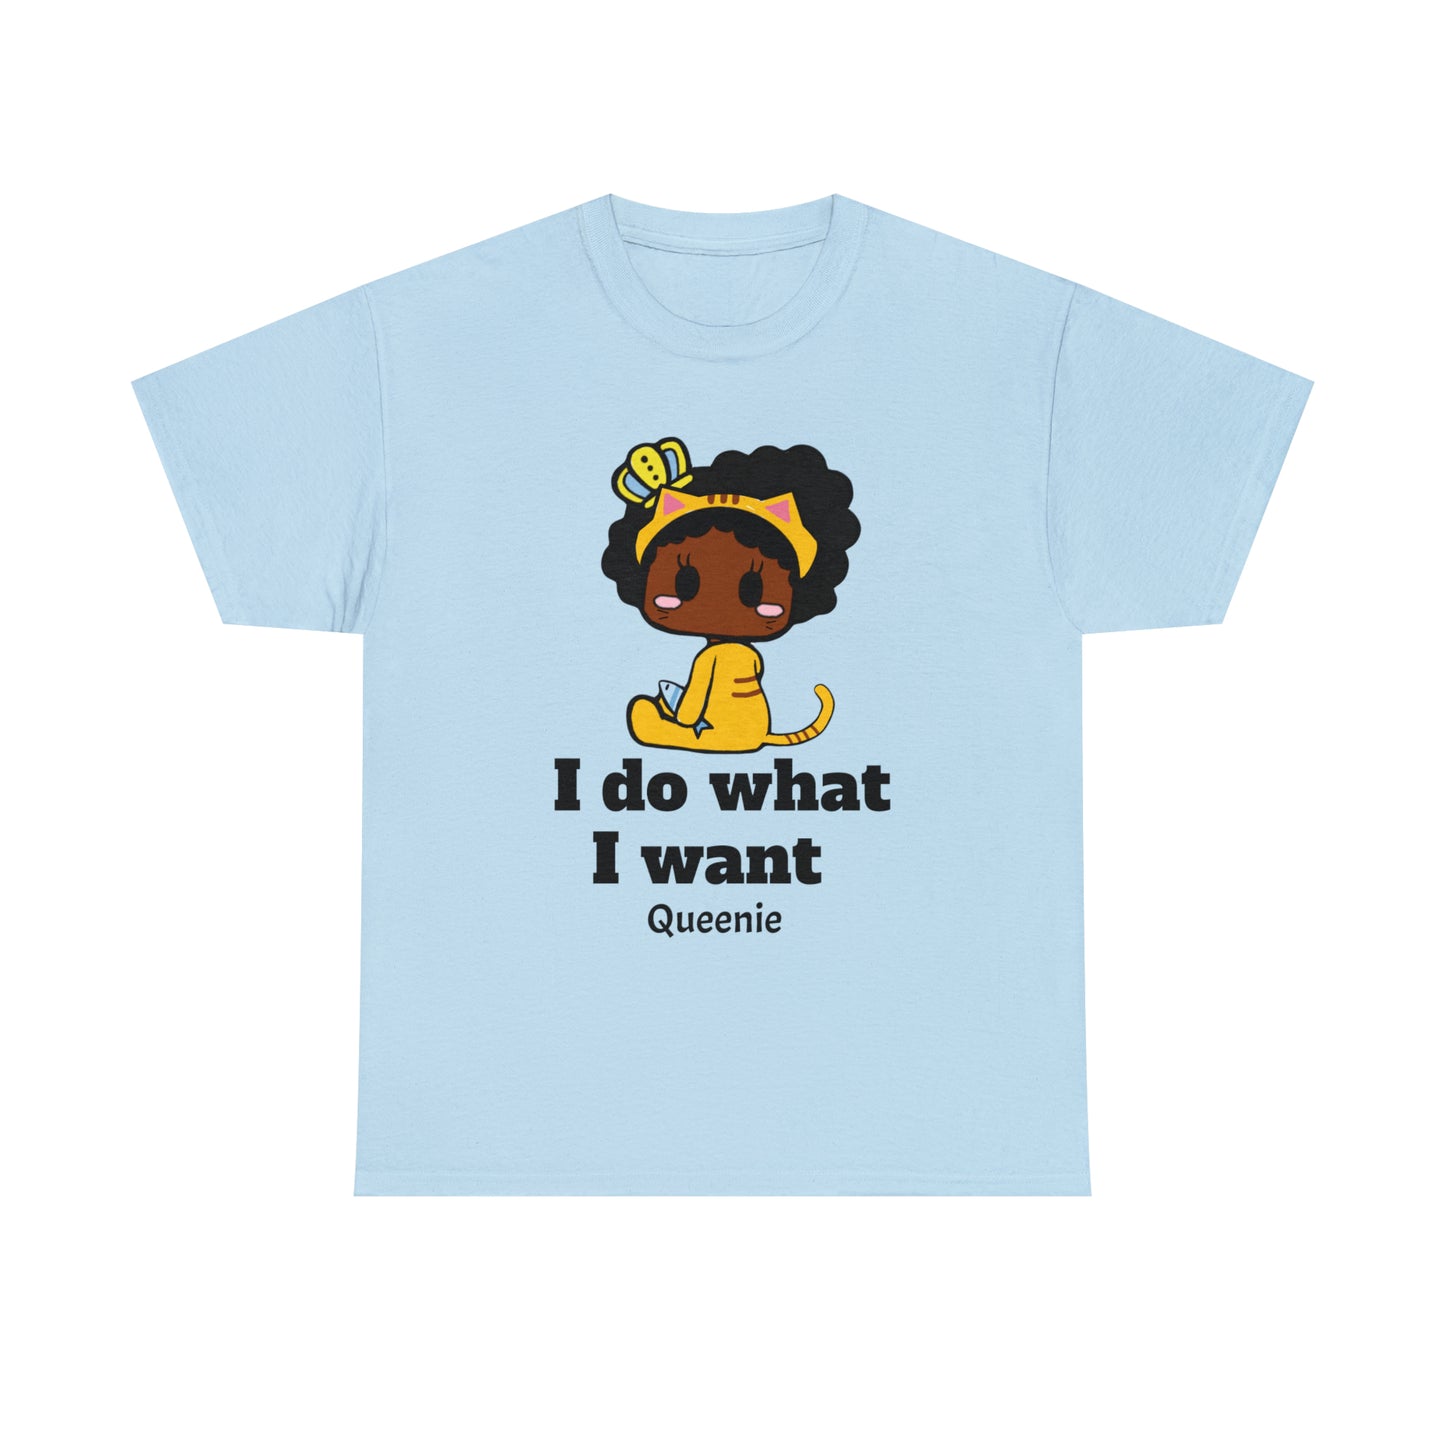 I do what I want Cat Queenie Unisex Tee